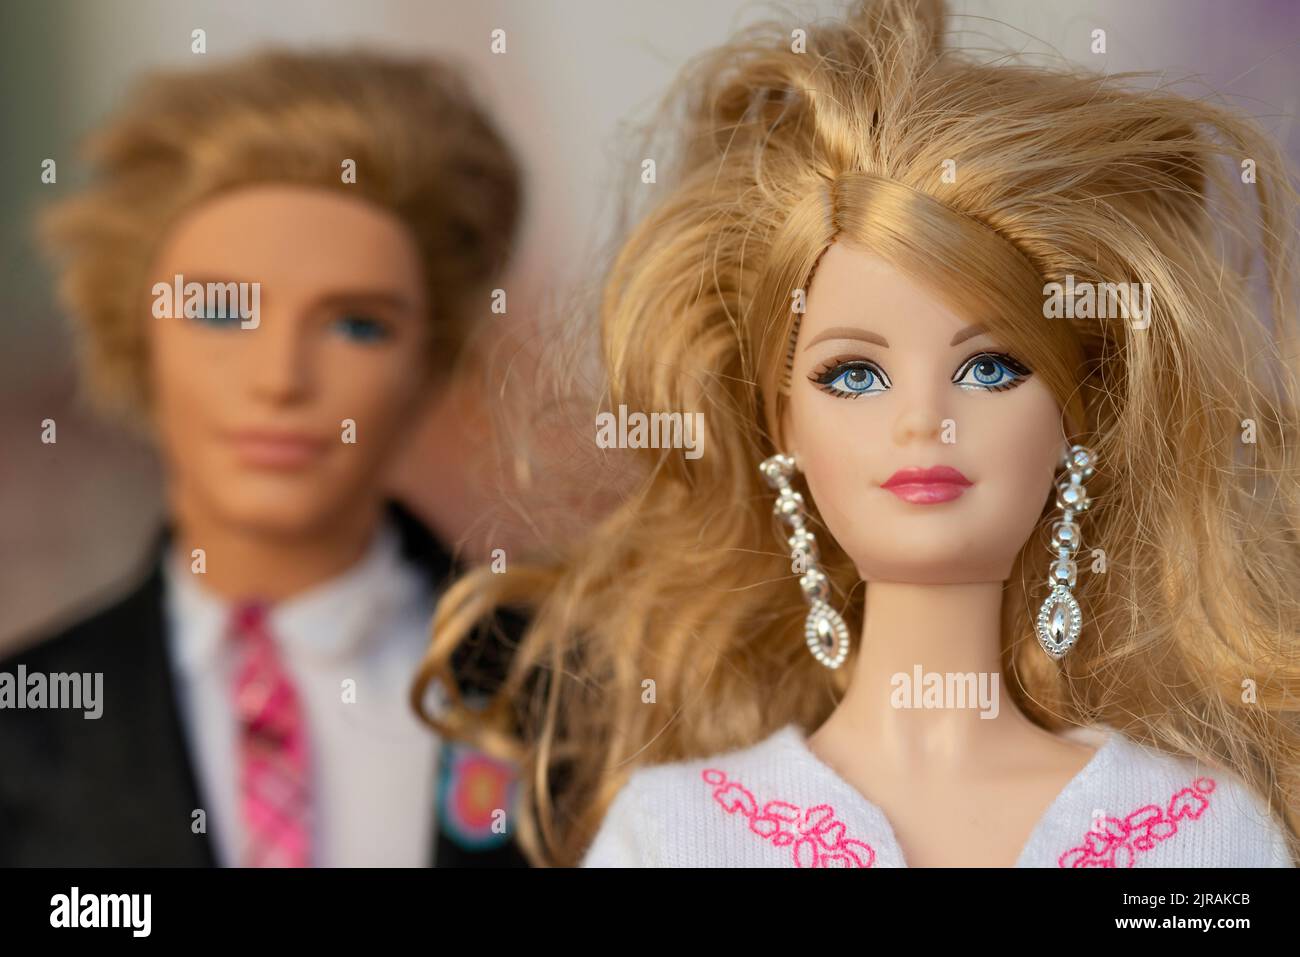 Barbie and Ken Toys Dolls Stock Photo